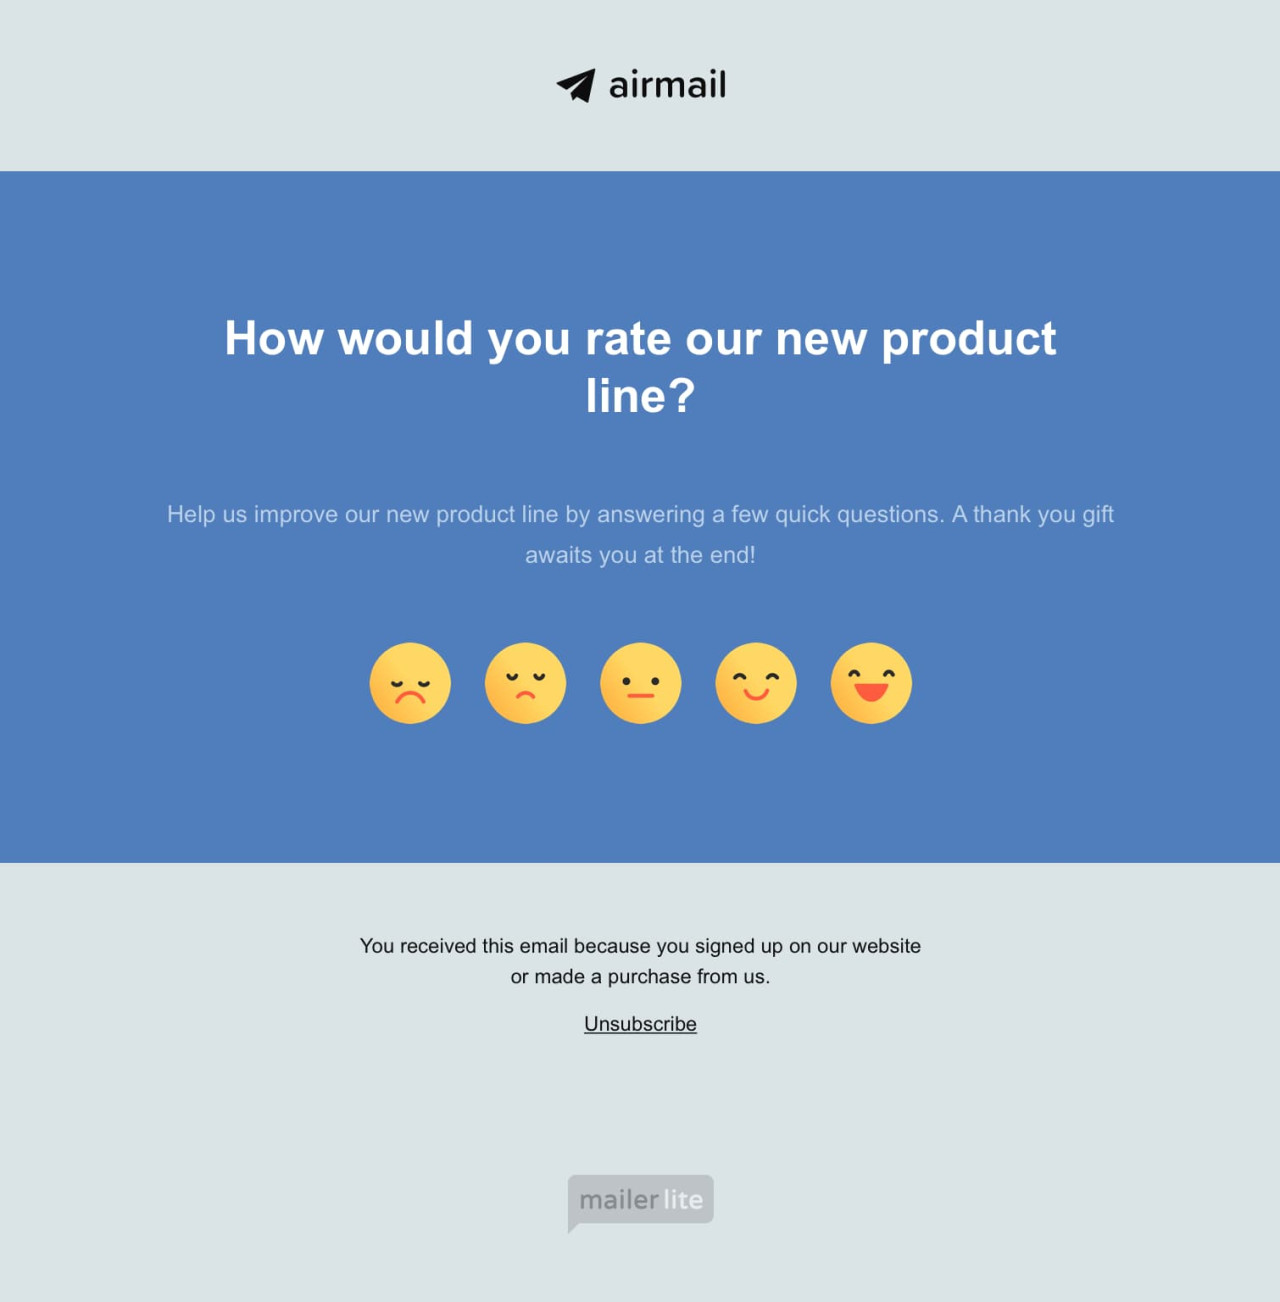 Customer satisfaction template - Made by MailerLite